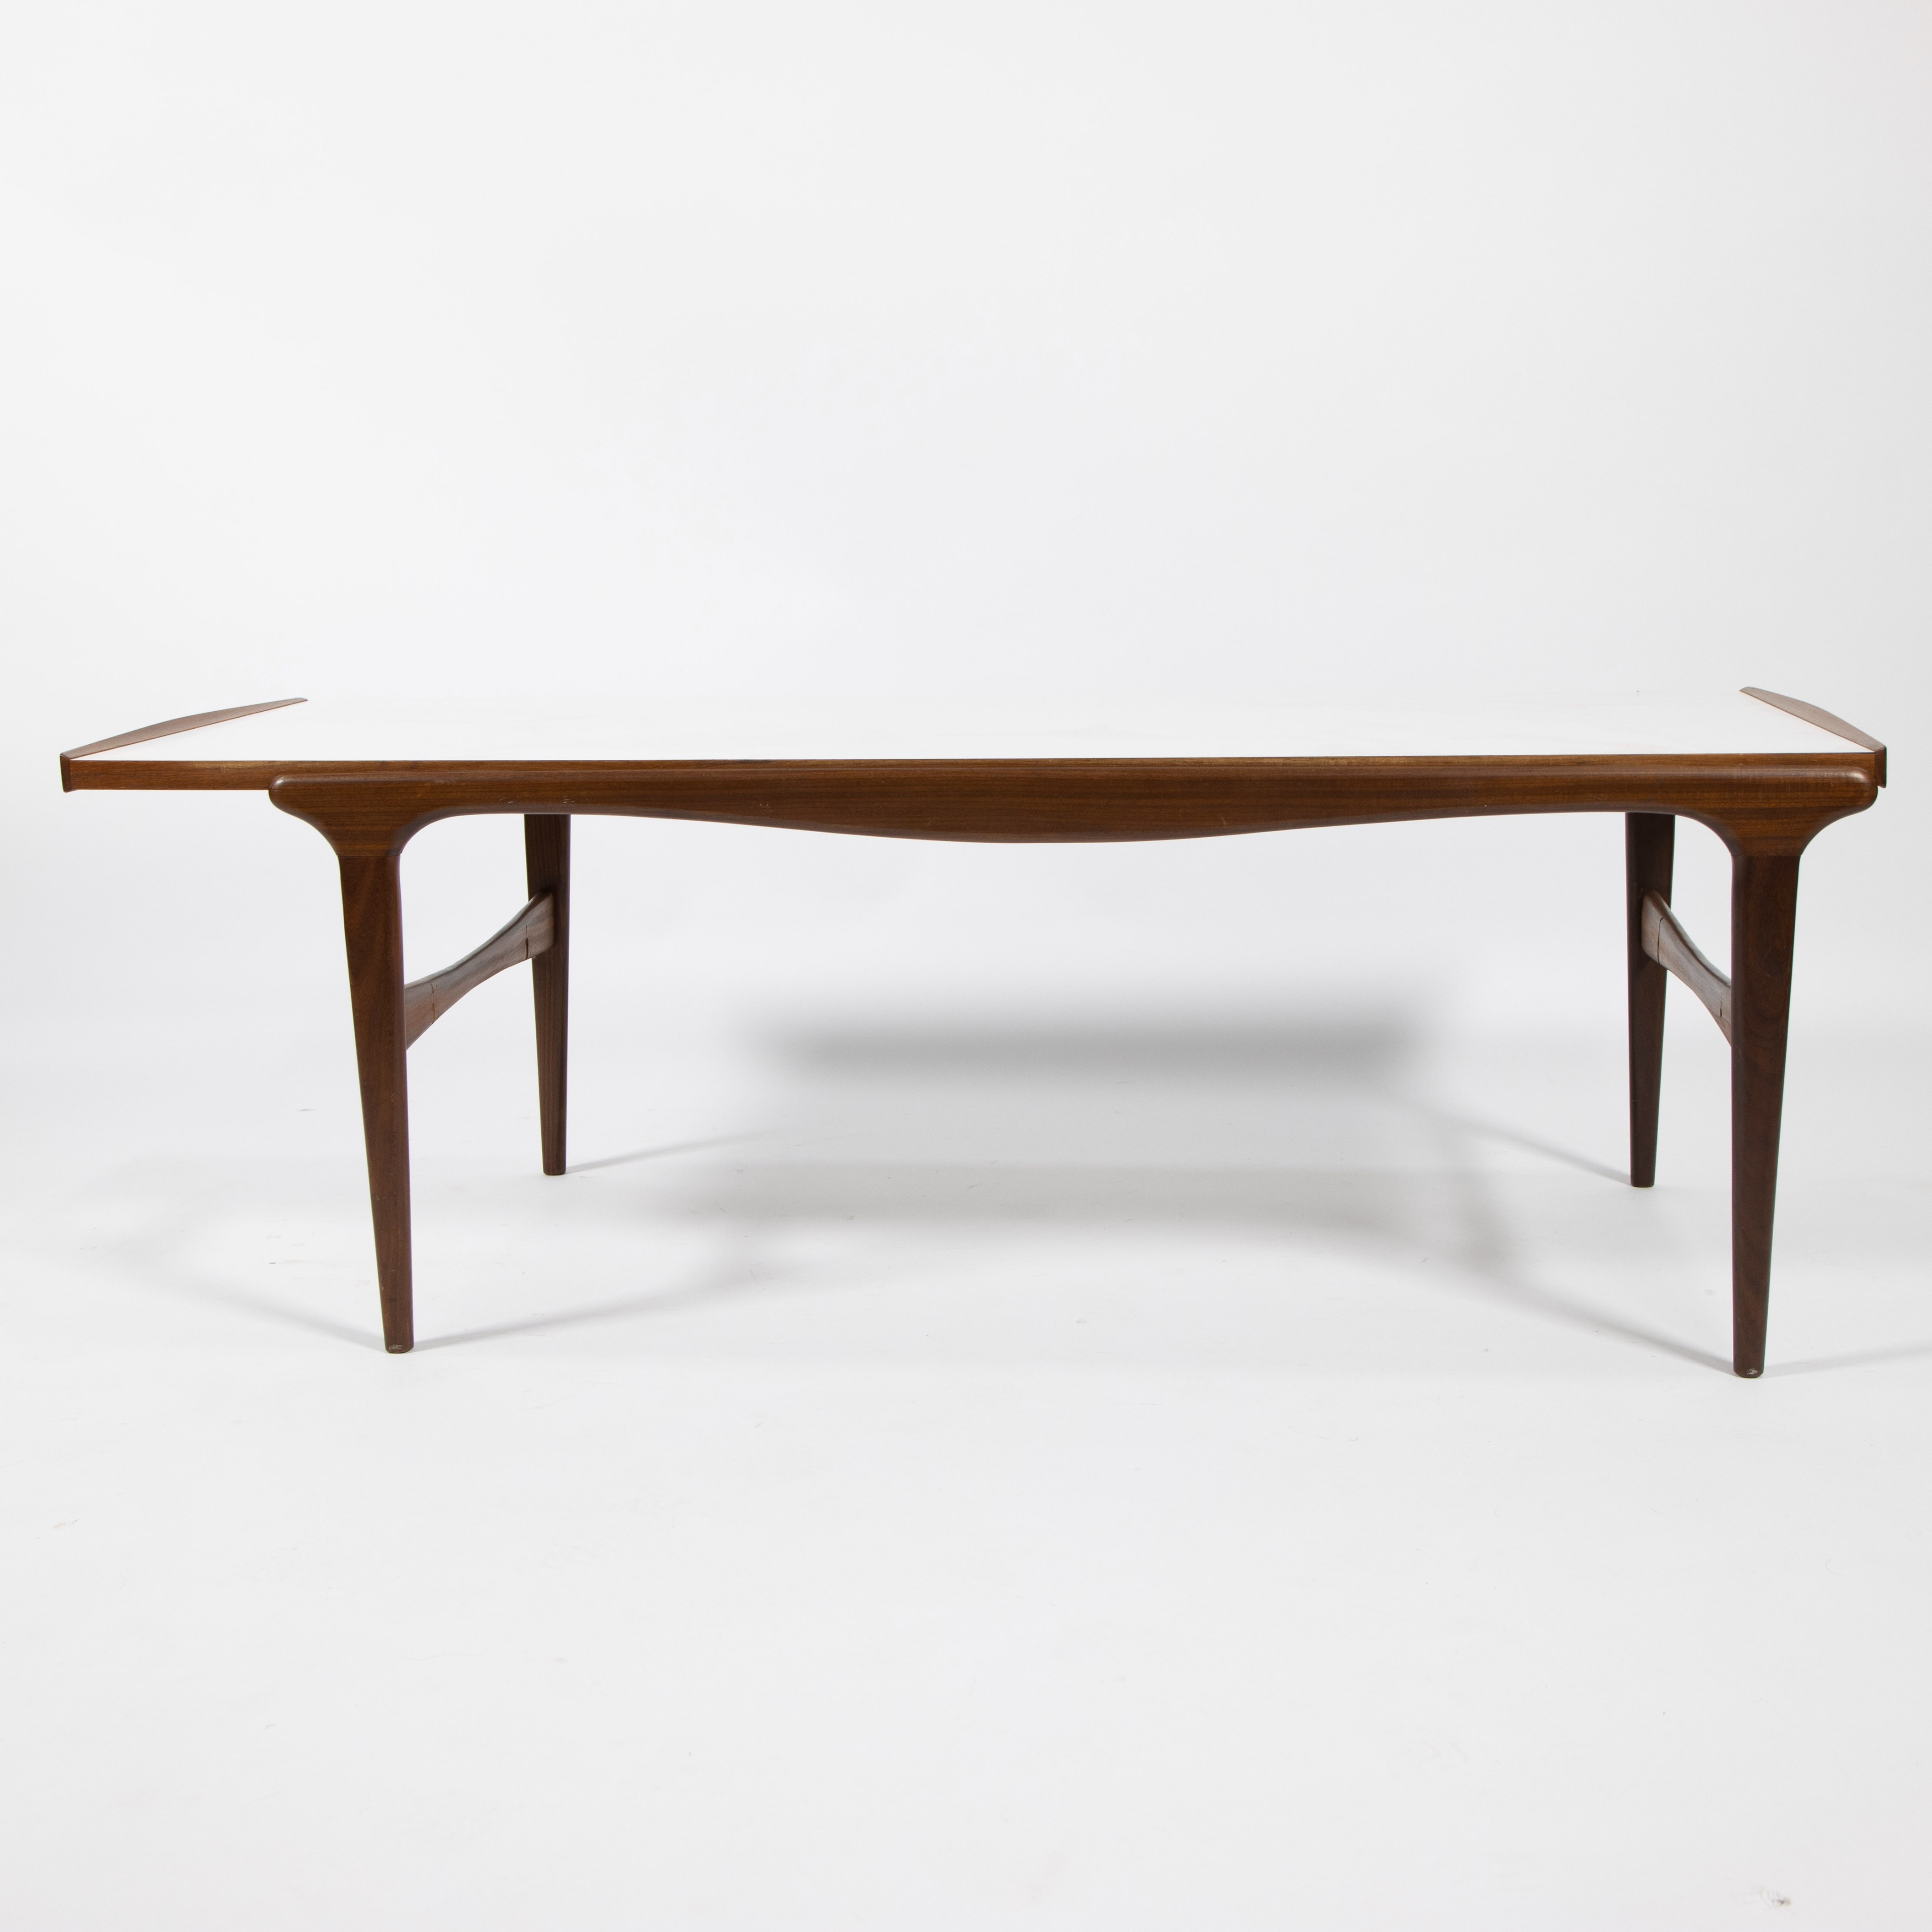 Vintage Scandinavian coffee table with formica top from the 1960s - Image 2 of 2